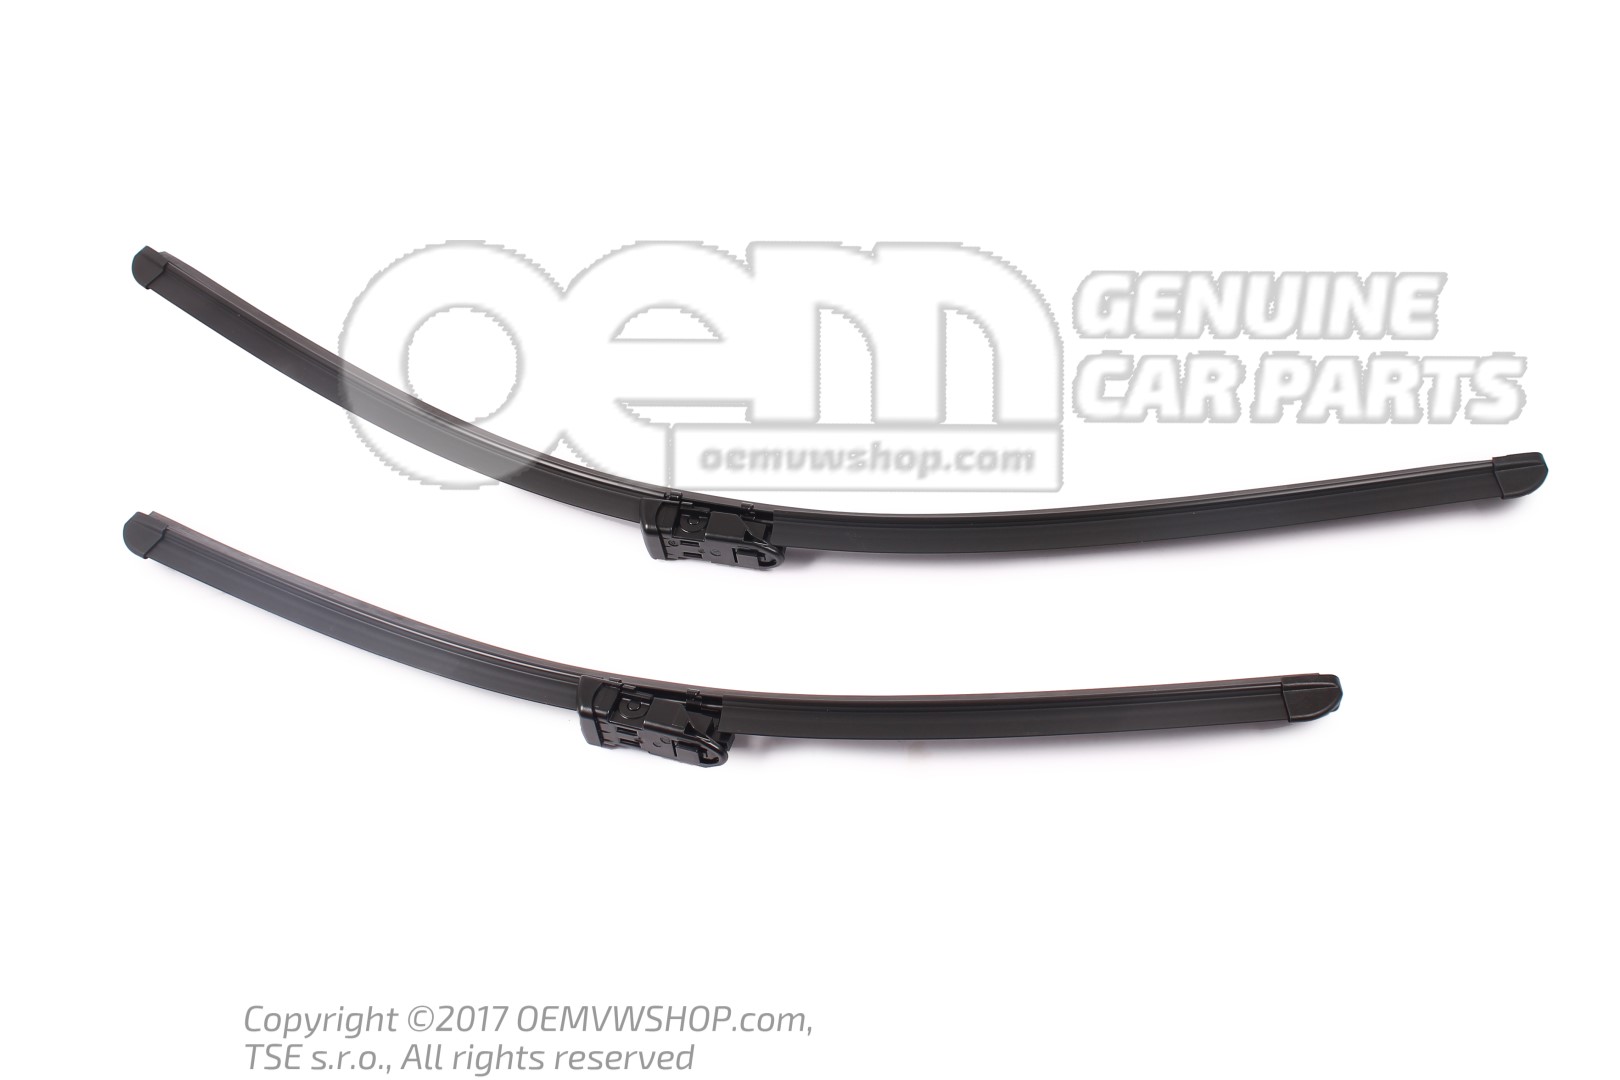 Quantity: 1 Front Bracket wiper blade 19/475mm for right-hand drive vehicles HELLA 9XW 190 253-191 Wiper Blade WPR19